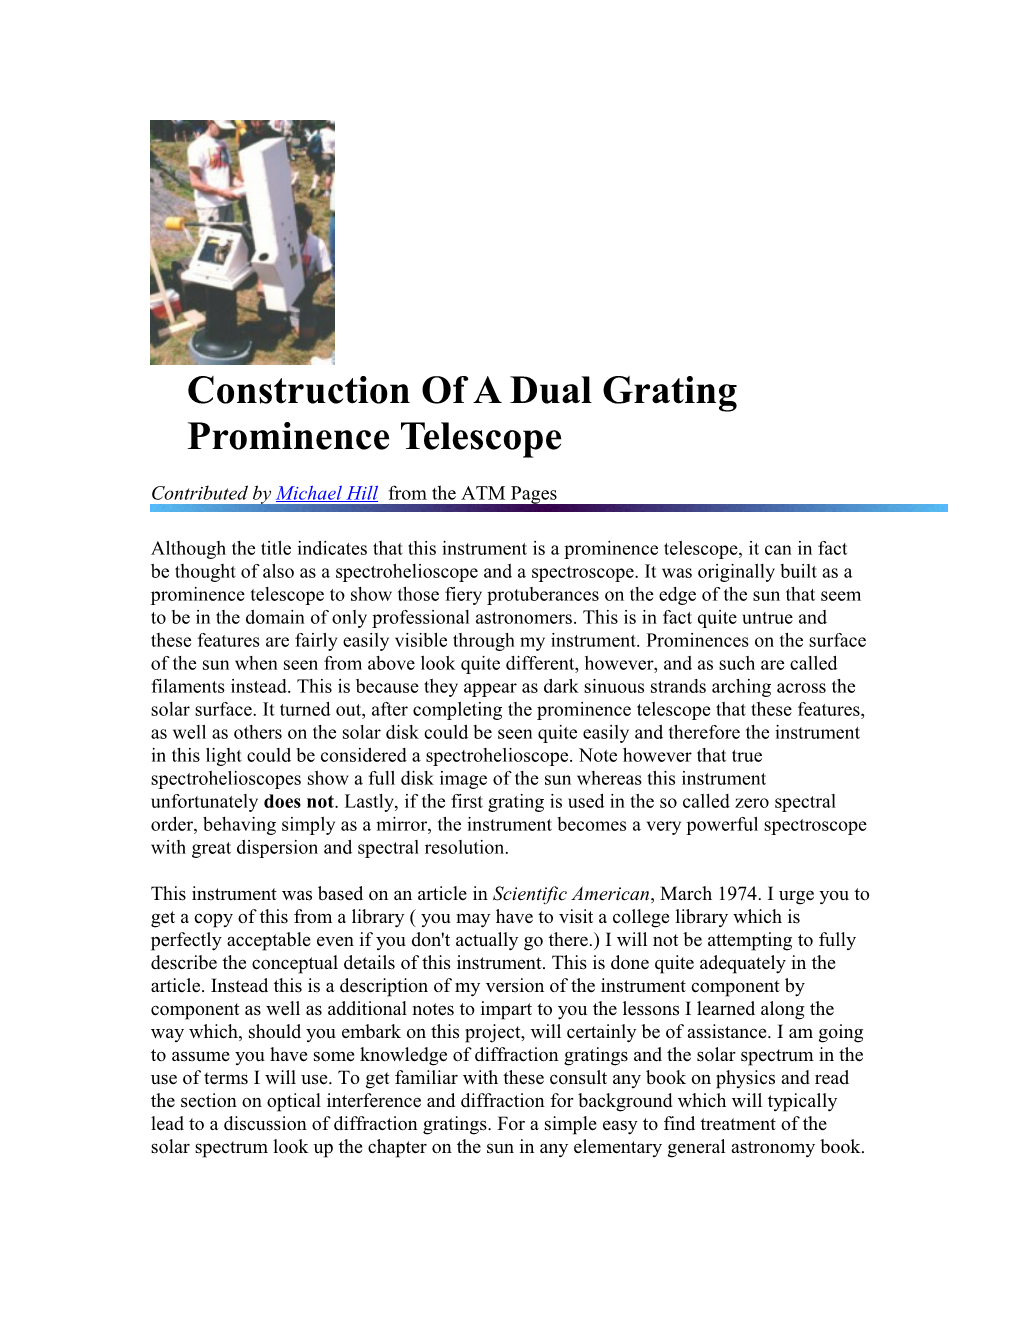 Construction of a Dual Grating Prominence Telescope